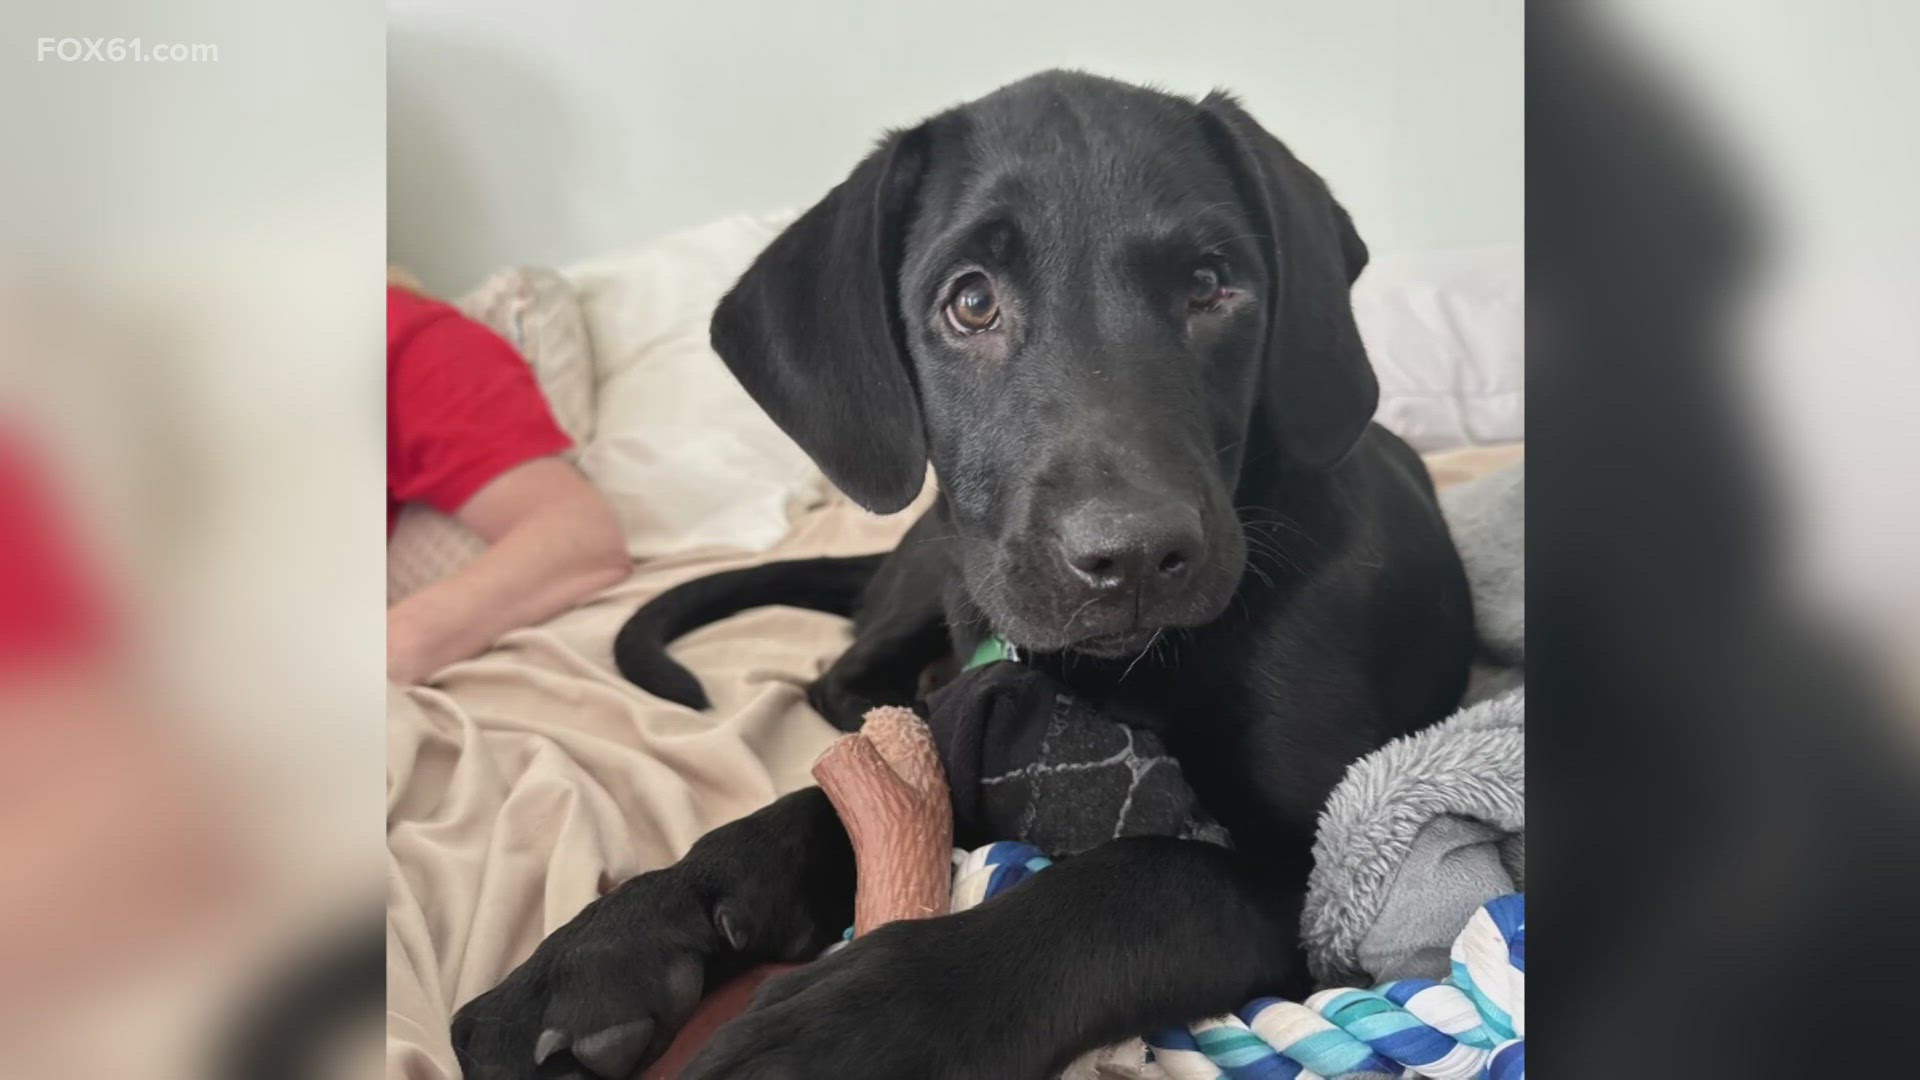 An East Haddam family is looking for their beloved dog June, a 14-week-old black lab that escaped after getting spooked during fireworks Thursday night.